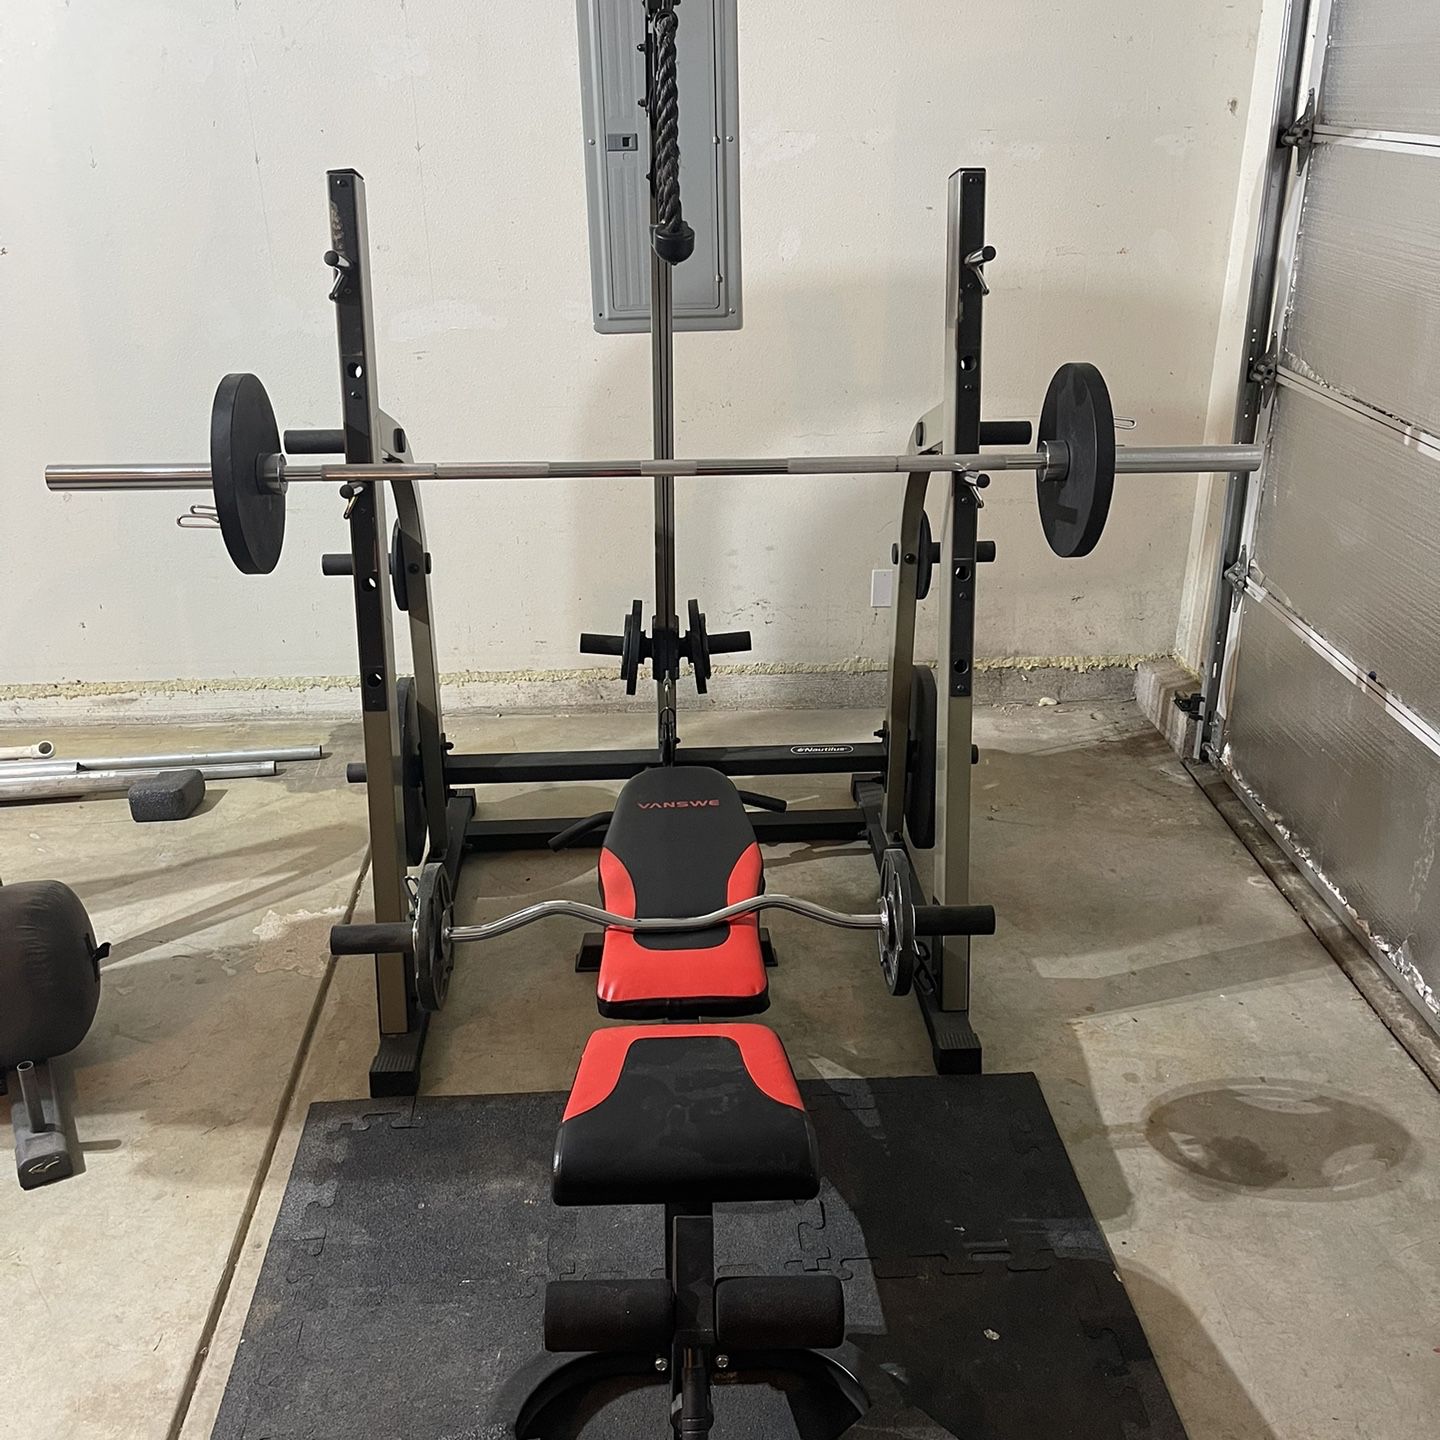 Squat Rack, Bench Bar And Weights 